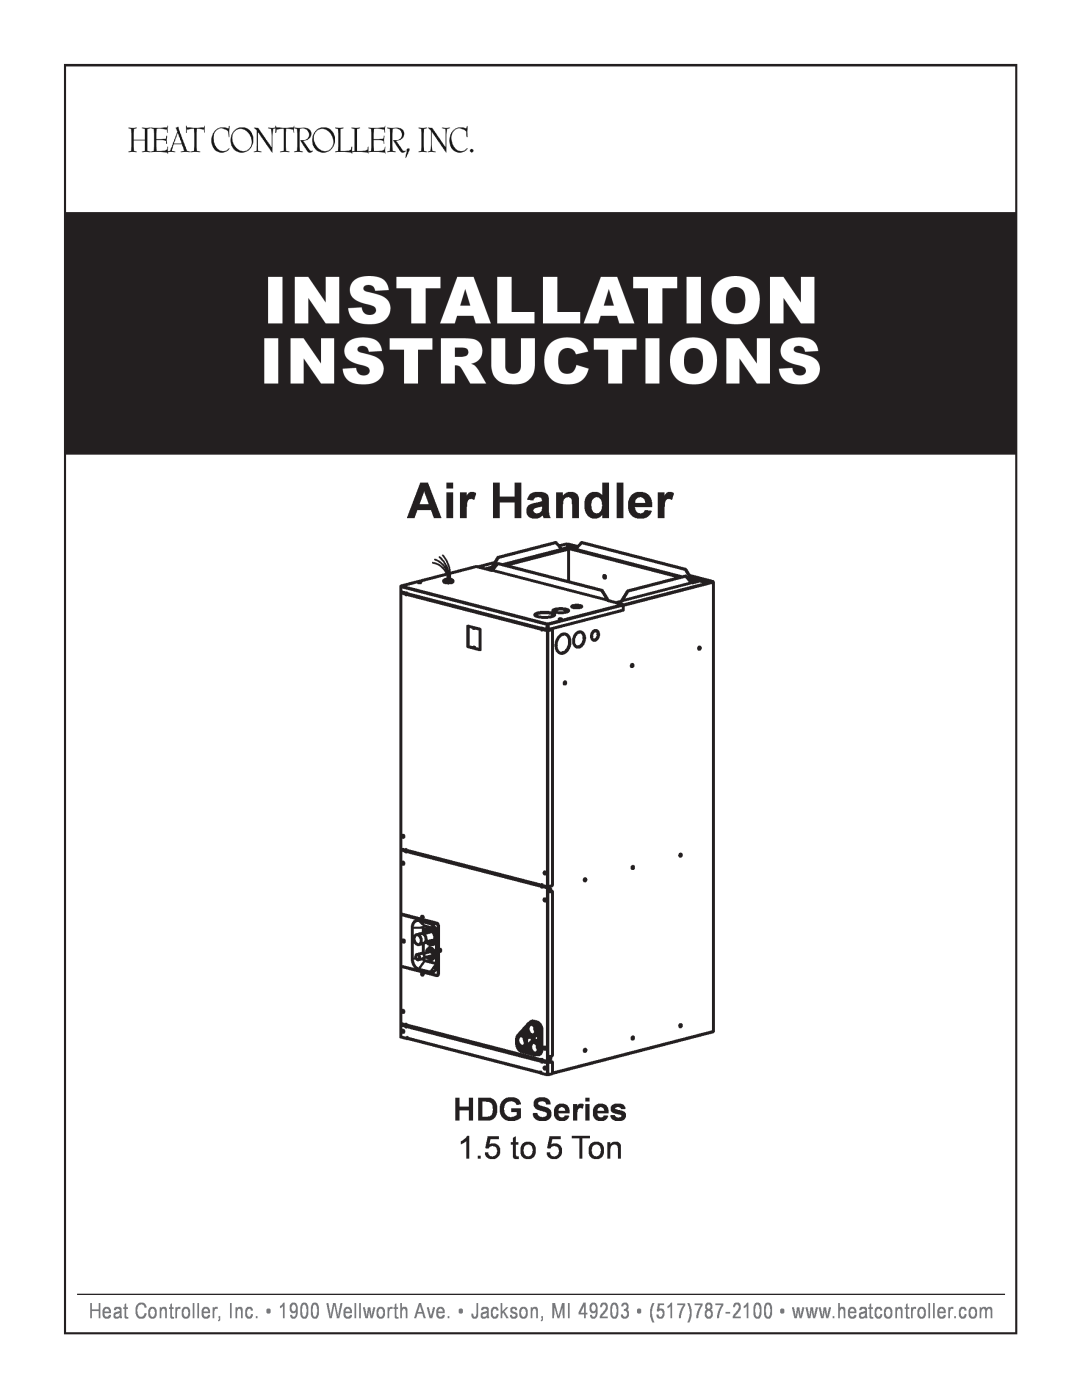 Heat Controller HDG60, HDG48 installation instructions HDG Series, Installation Instructions, Air Handler, 1.5 to 5 Ton 